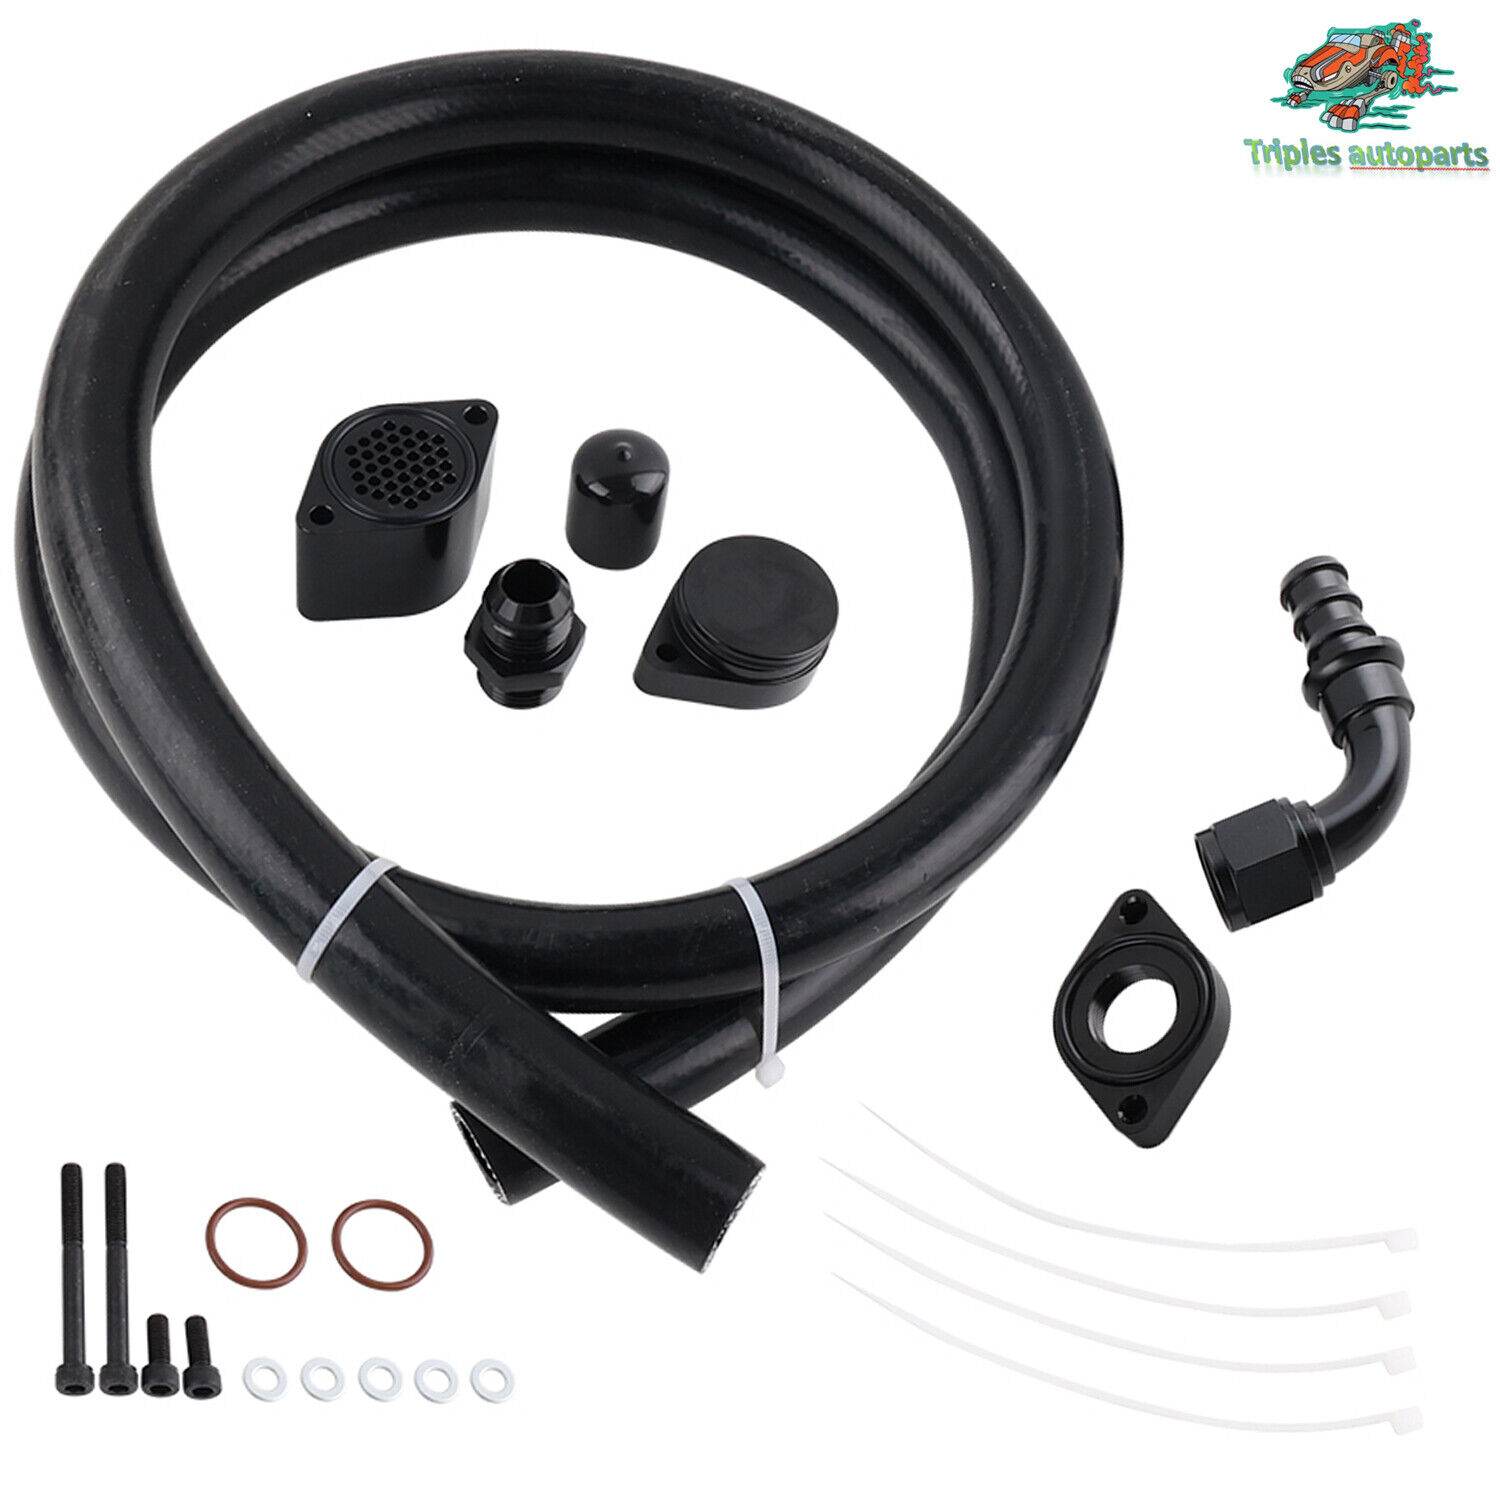 New Reroute Engine Ventilation Kits For 2011-20 FORD 6.7L Powerstroke CCV PCV